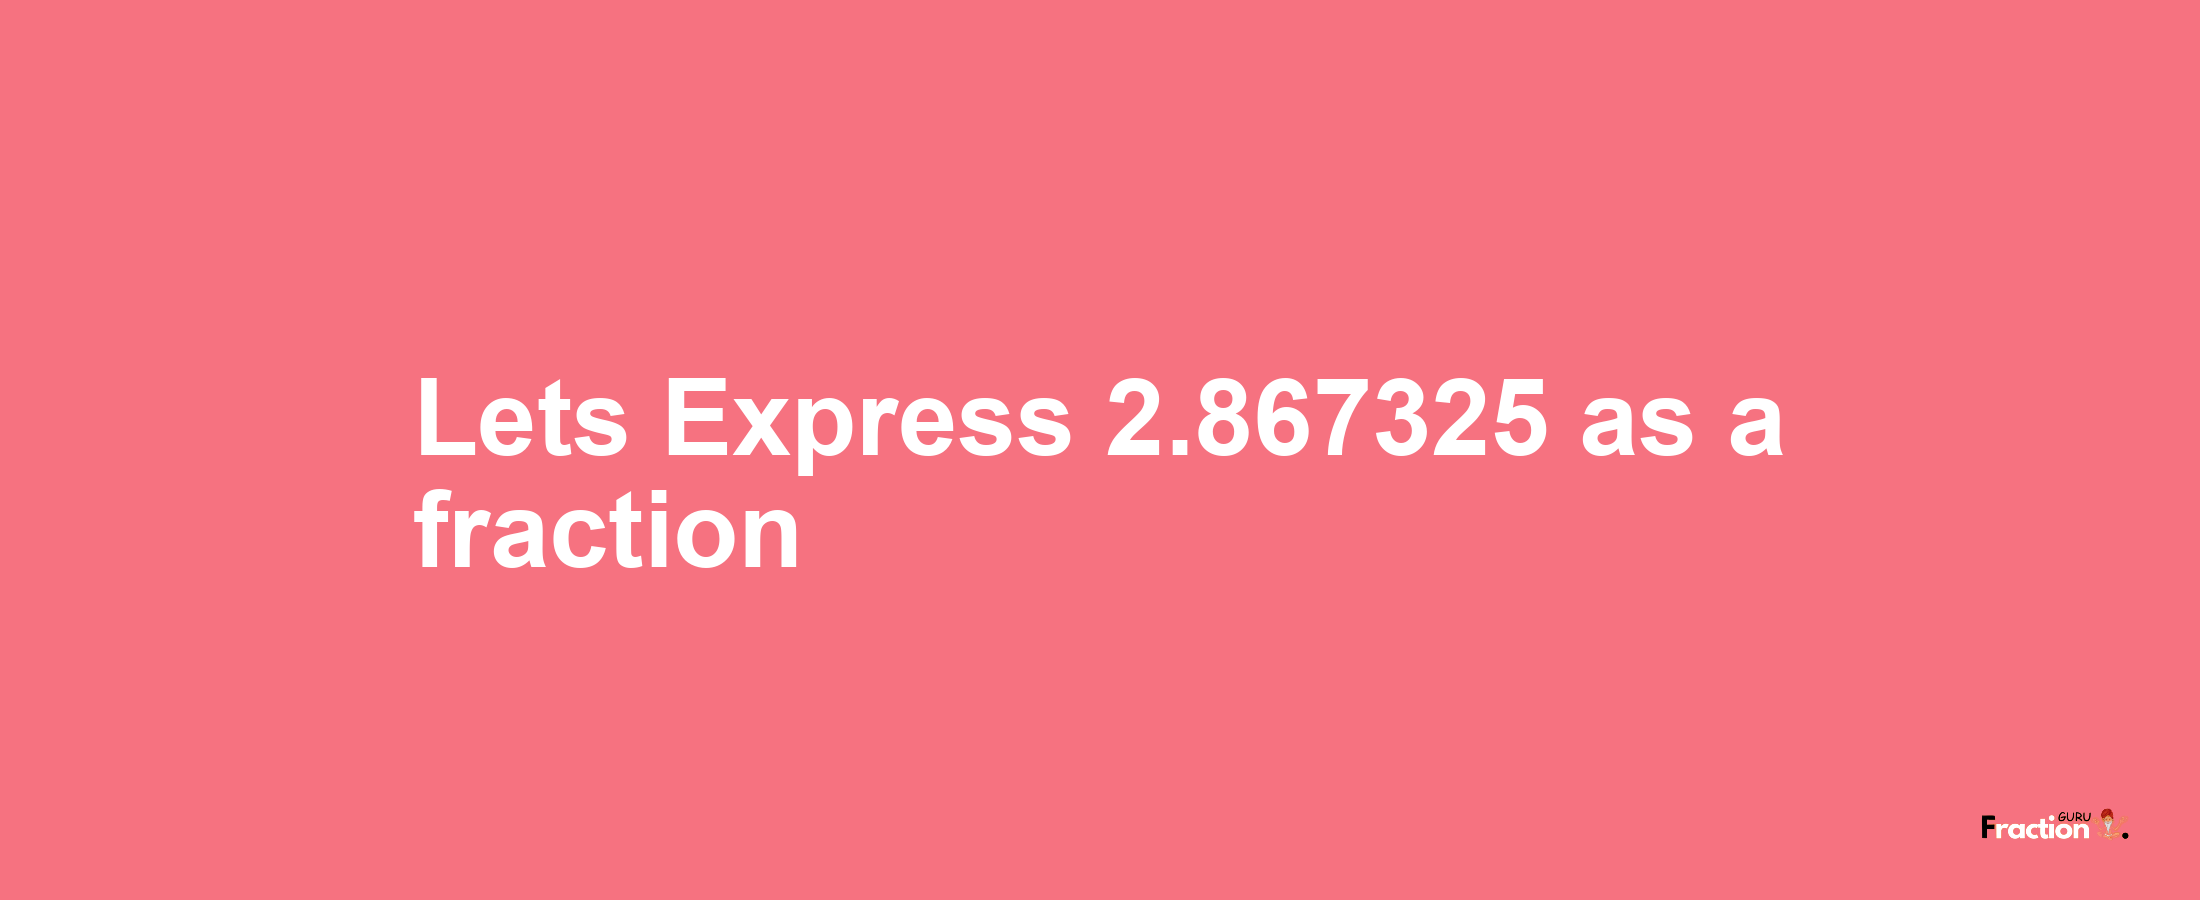 Lets Express 2.867325 as afraction